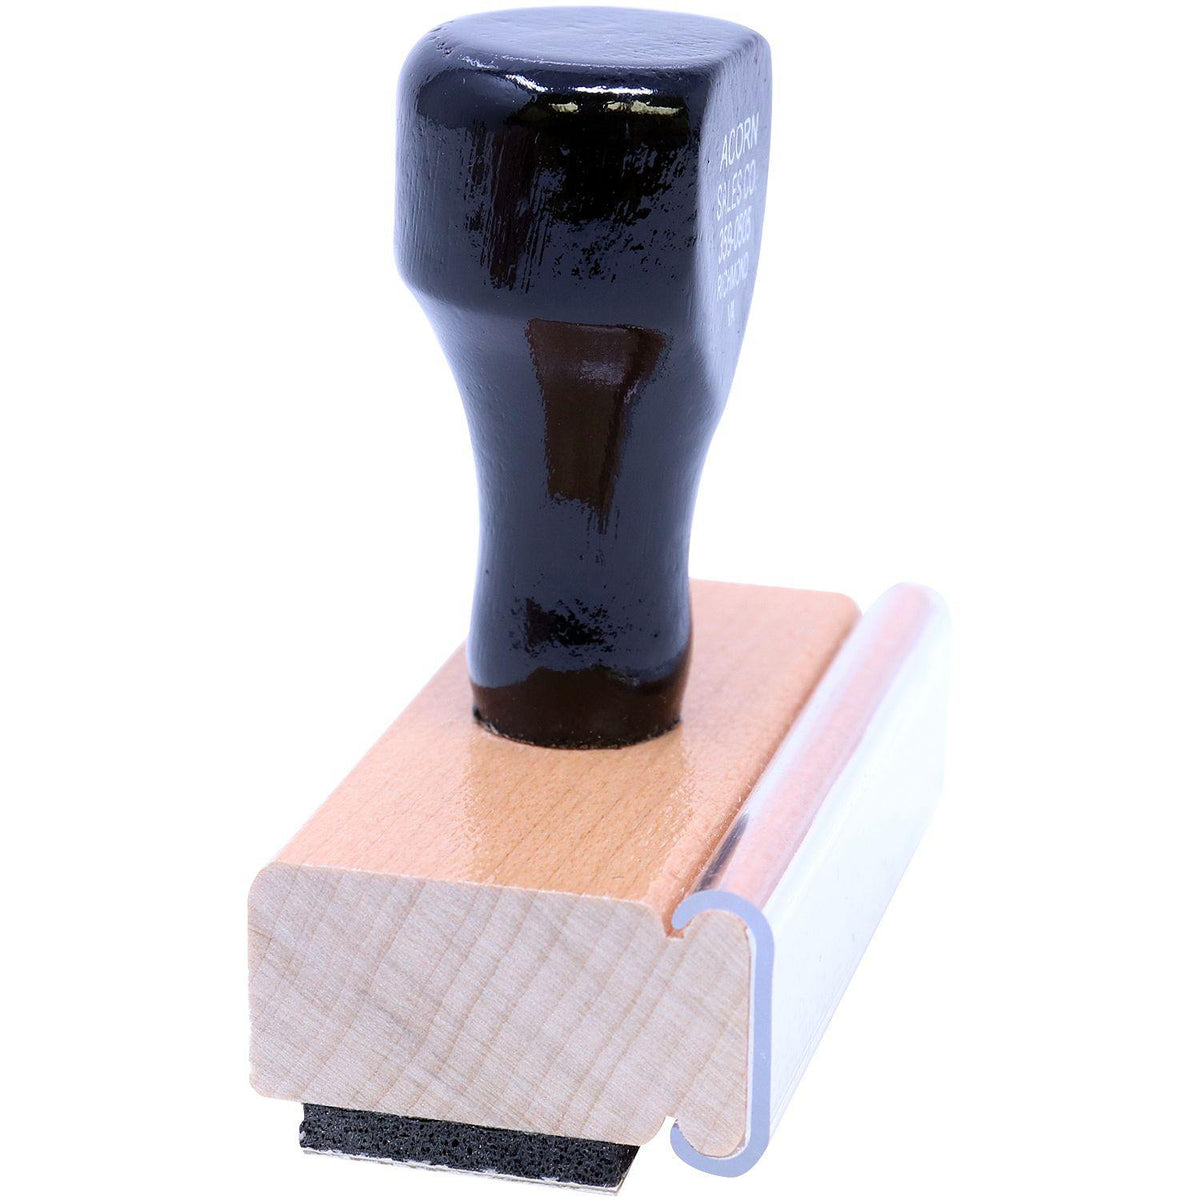 Side View of Large Received with Box Rubber Stamp at an Angle